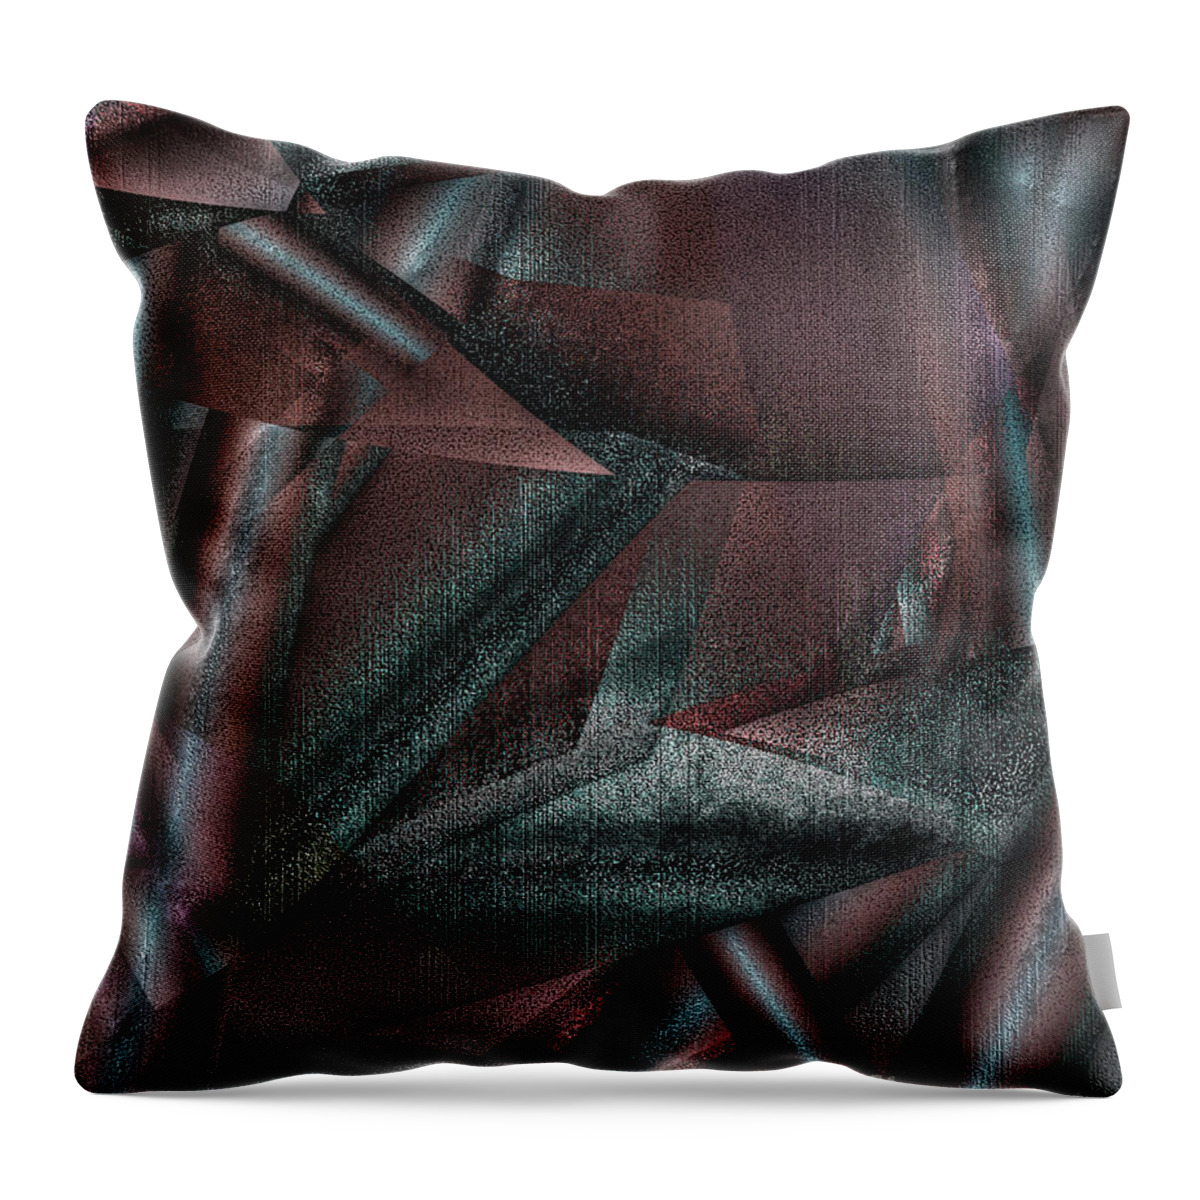 Fractal Throw Pillow featuring the digital art Angst by Richard Ortolano